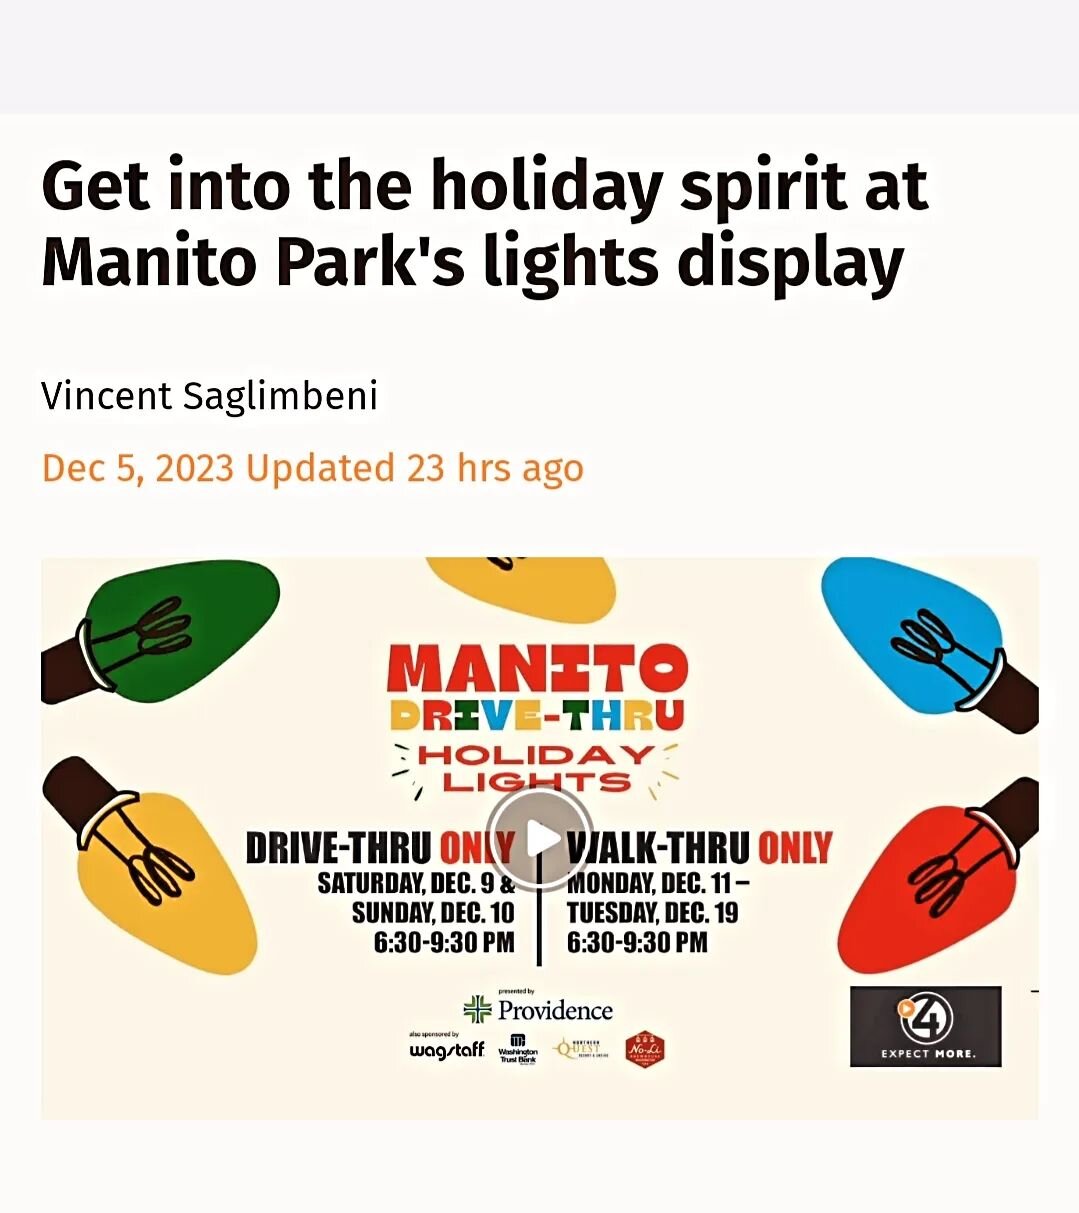 Thank you @4newsnow for highlighting this wonderful Holiday Lights Event @ Manito Park by @thefriendsofmanito . We're excited to be there again this season serving #hotcocoa &amp; #goodcoffeedoinggood☕ ! 
For this article see: 
https://www.kxly.com/l